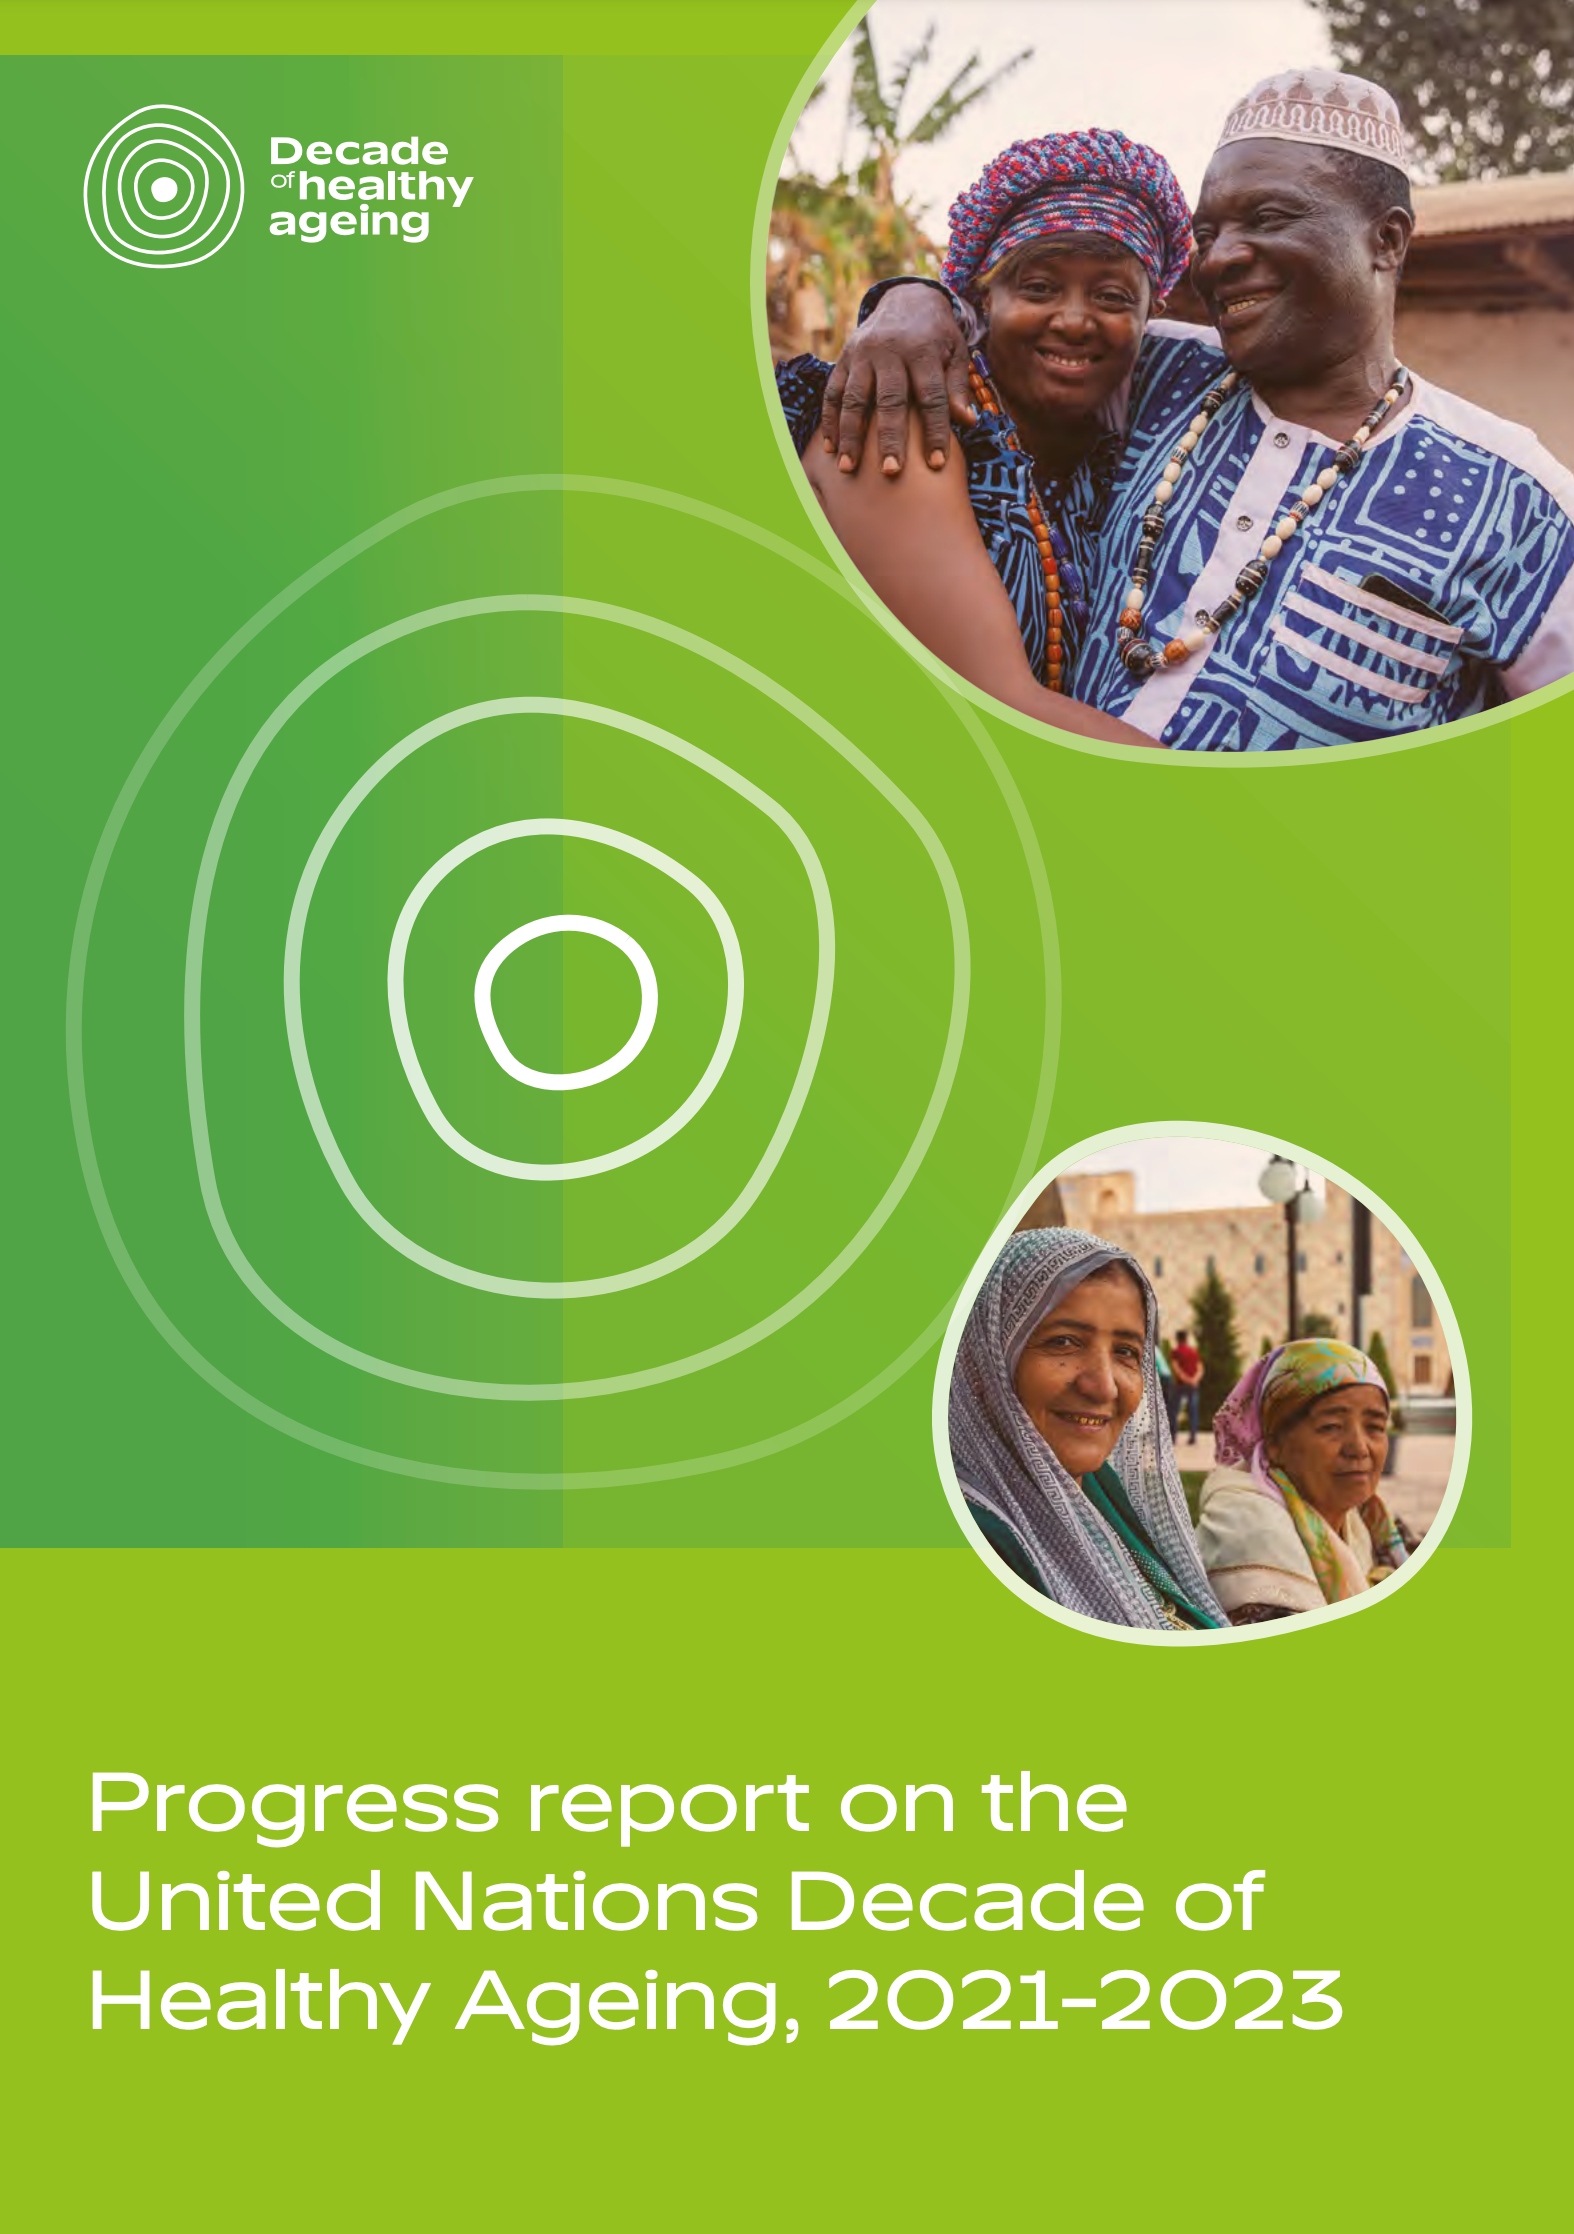 Progress report on the UN Decade of Healthy Ageing, 2021-2023